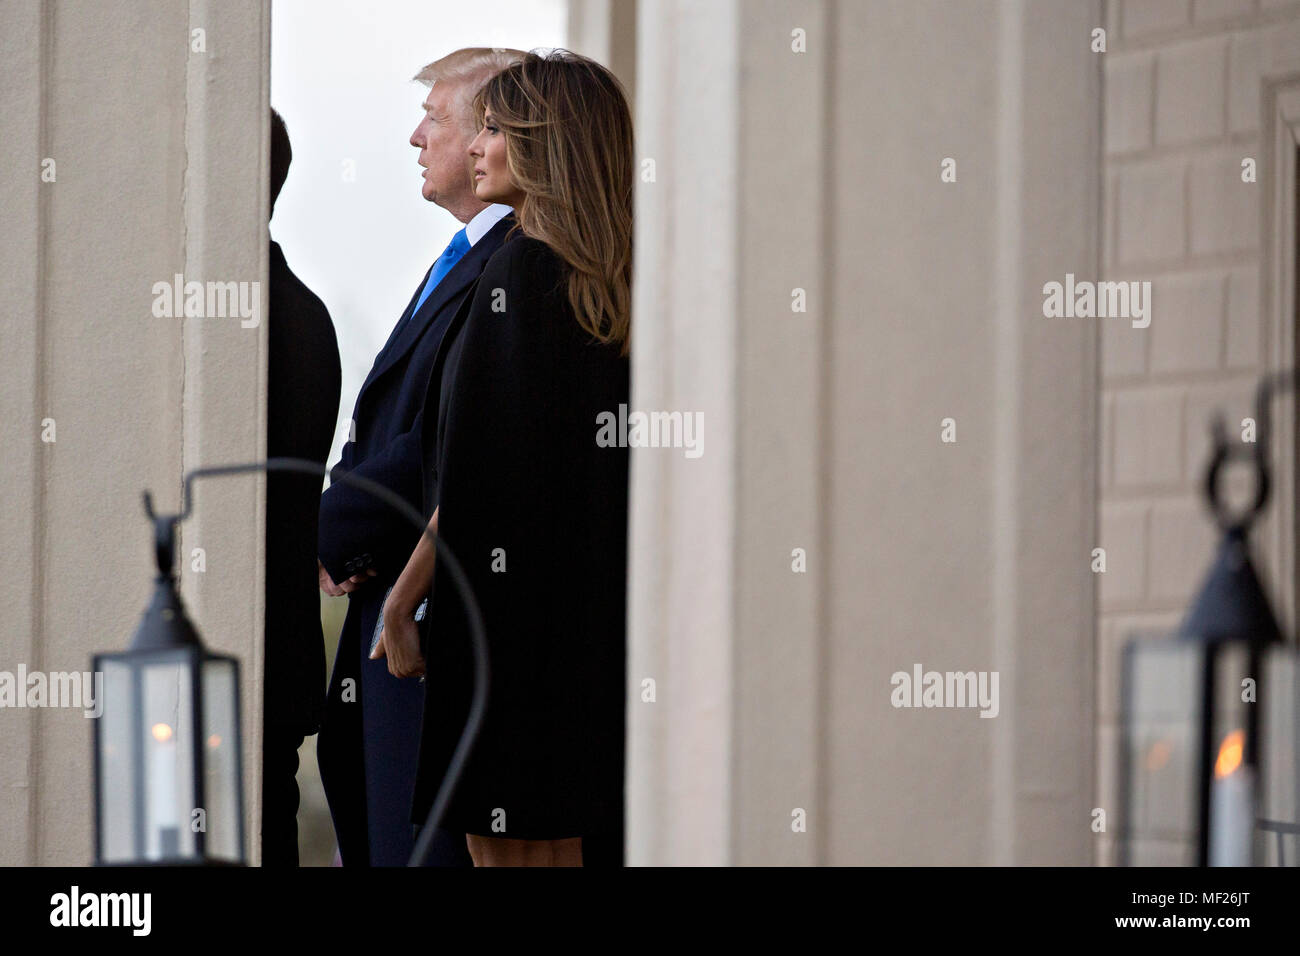 U.S. First Lady Melania Trump, right, and U.S. President Donald Trump tour outside the Mansion at the Mount Vernon estate of first U.S. President George Washington in Mount Vernon, Virginia, U.S., on Monday, April 23, 2018. As Macron arrives for the first state visit of Trump's presidency, the U.S. leader is threatening to upend the global trading system with tariffs on China, maybe Europe too. Credit: Andrew Harrer / Pool via CNP  - NO WIRE SERVICE - Photo: Andrew Harrer/Consolidated News Photos/Andrew Harrer - Pool via CNP Stock Photo